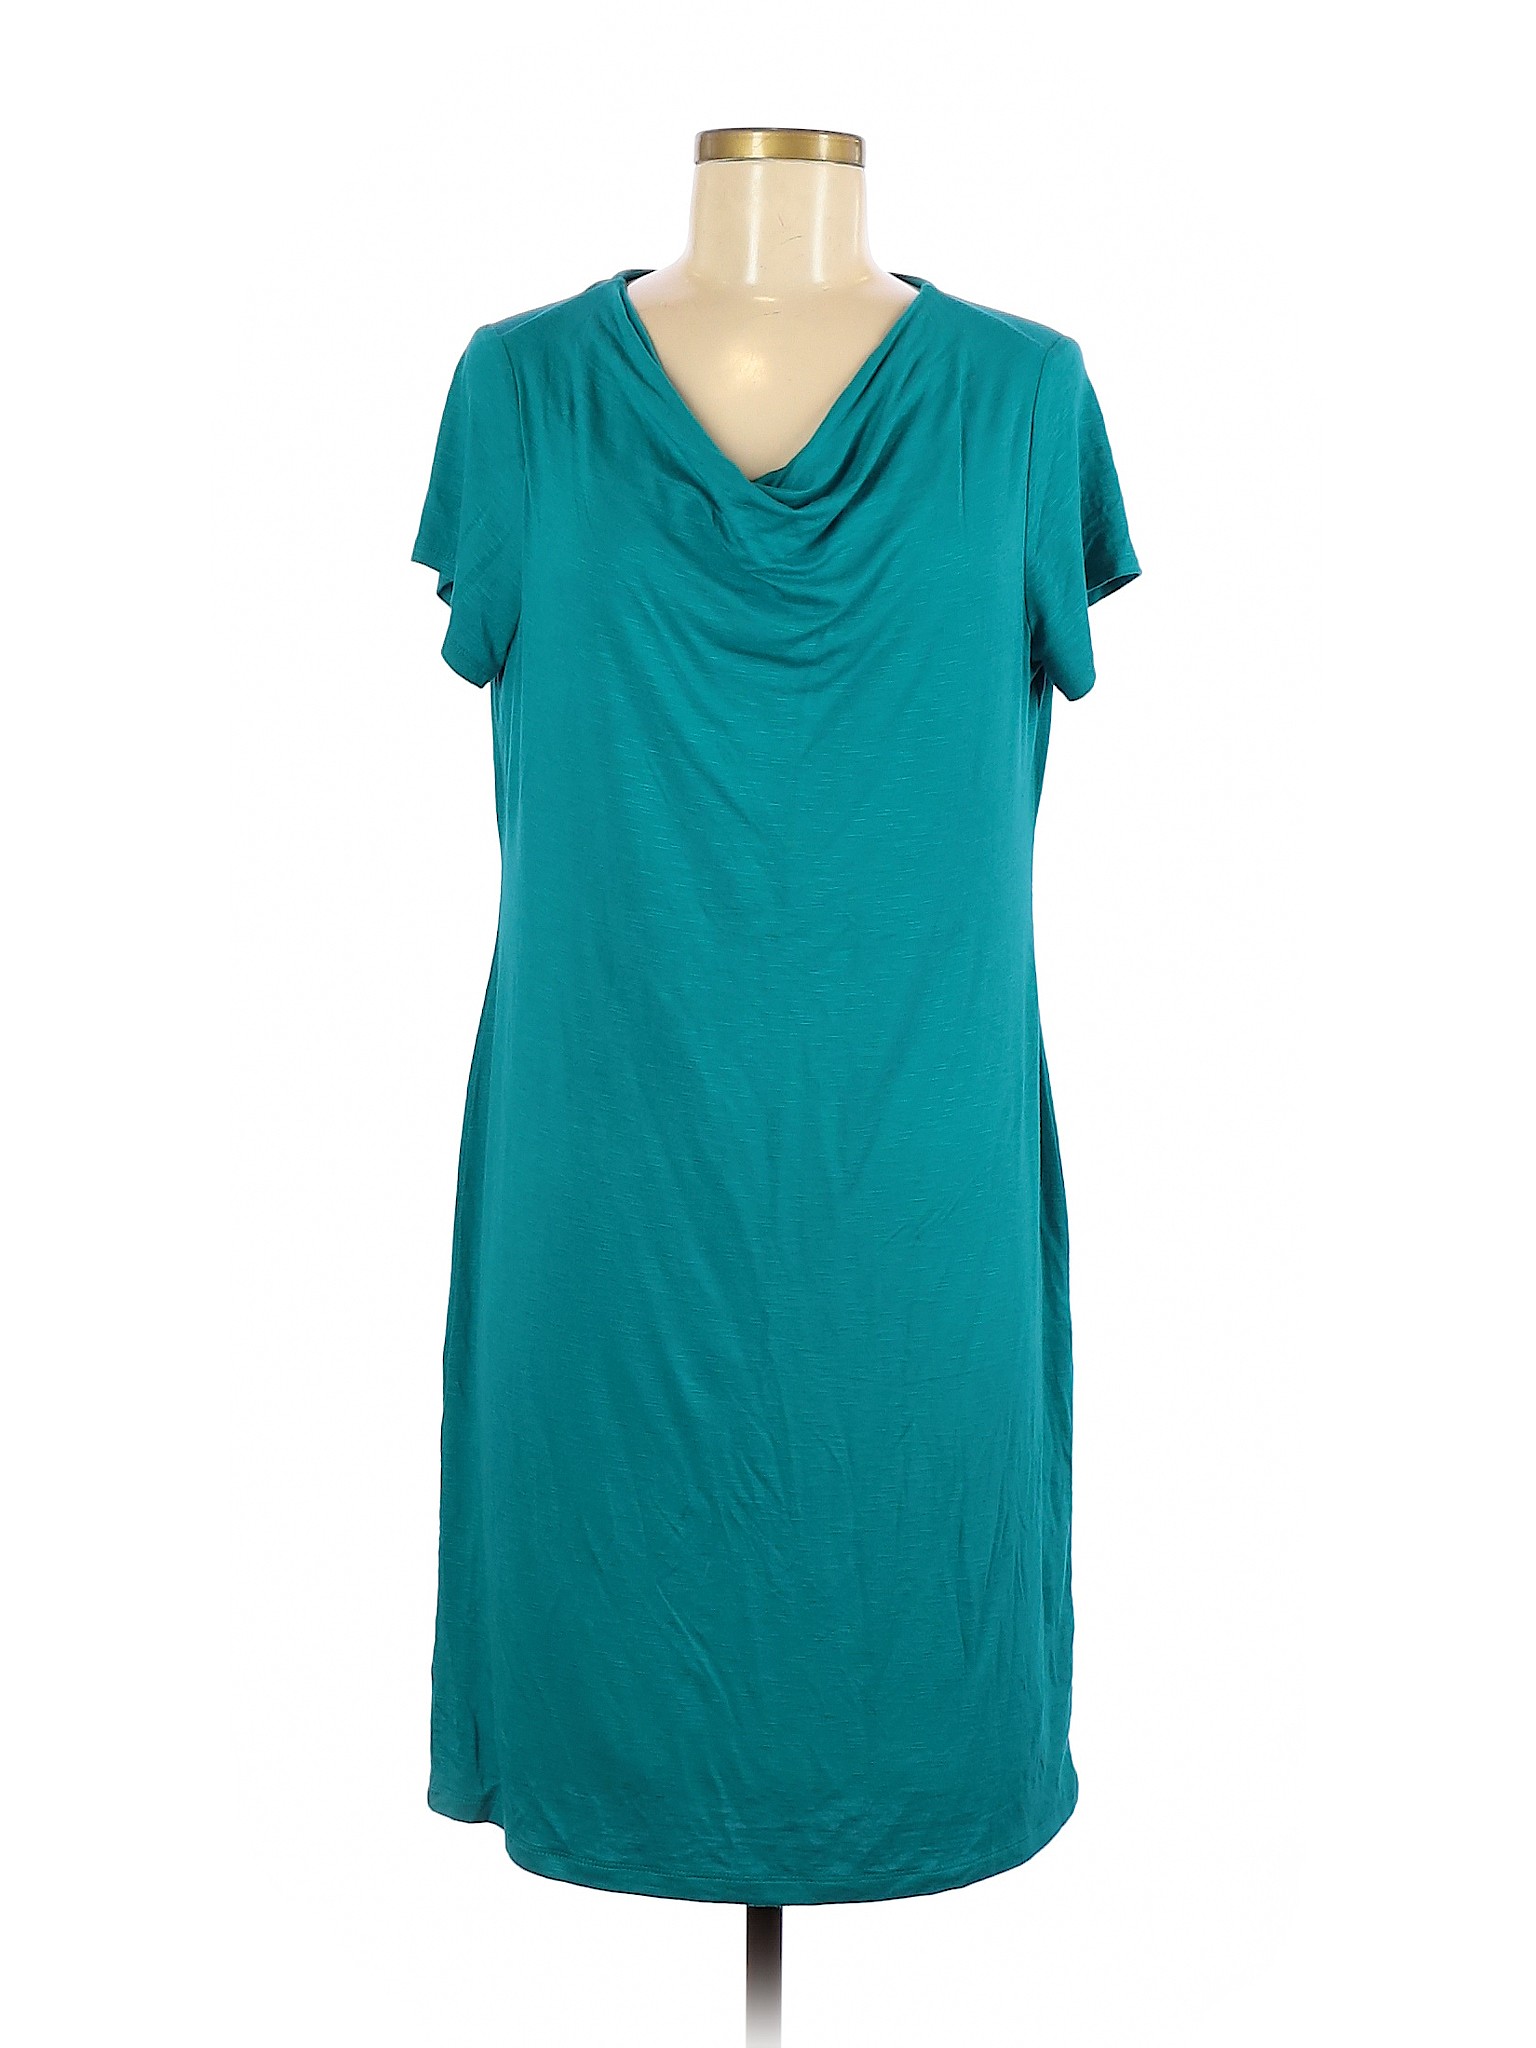 Chico's Solid Teal Casual Dress Size Med (1) - 89% off | thredUP